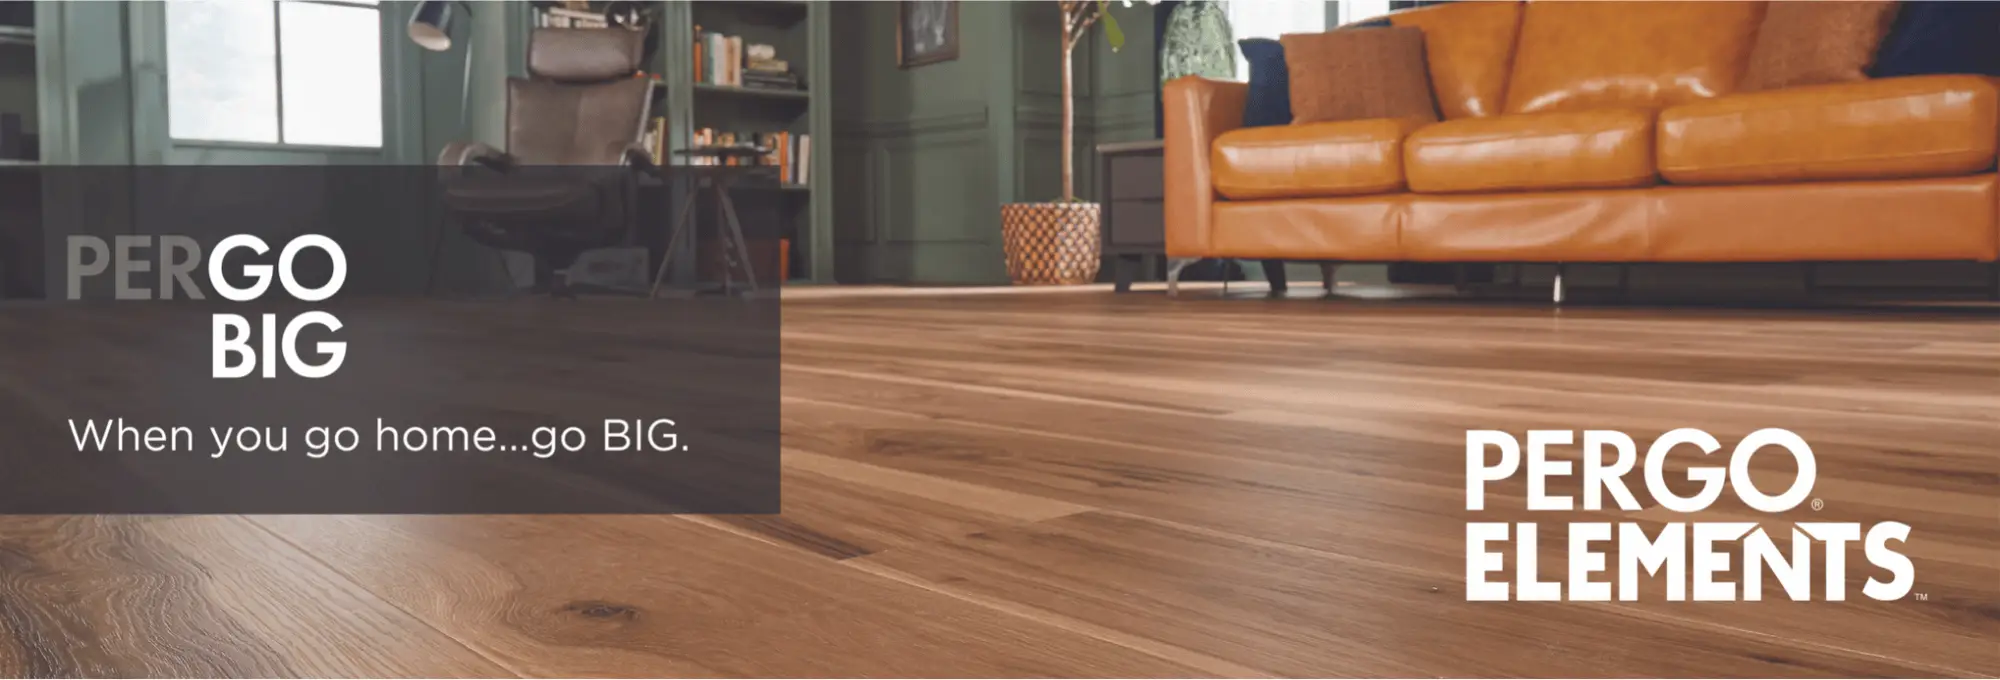 Explore Pergo flooring products from Central Floor Supply in Fresno CA